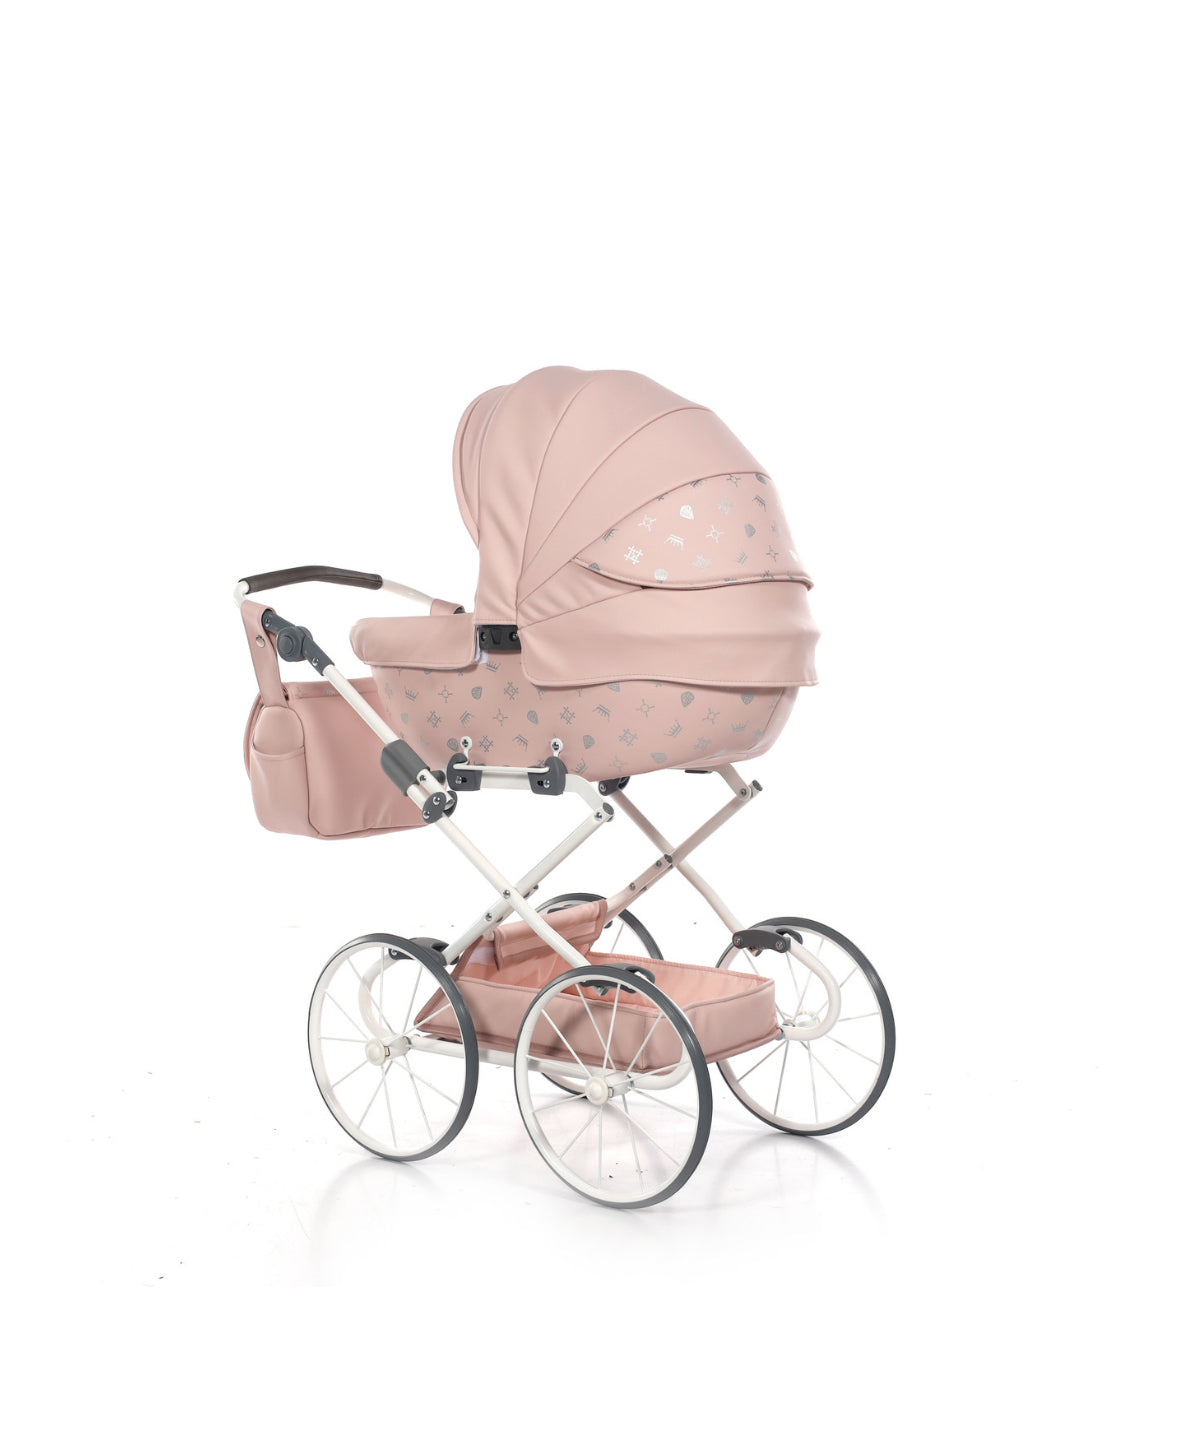 IMPERIAL CLASSIC PINK DOLL'S PRAM (1-2 days delivery)